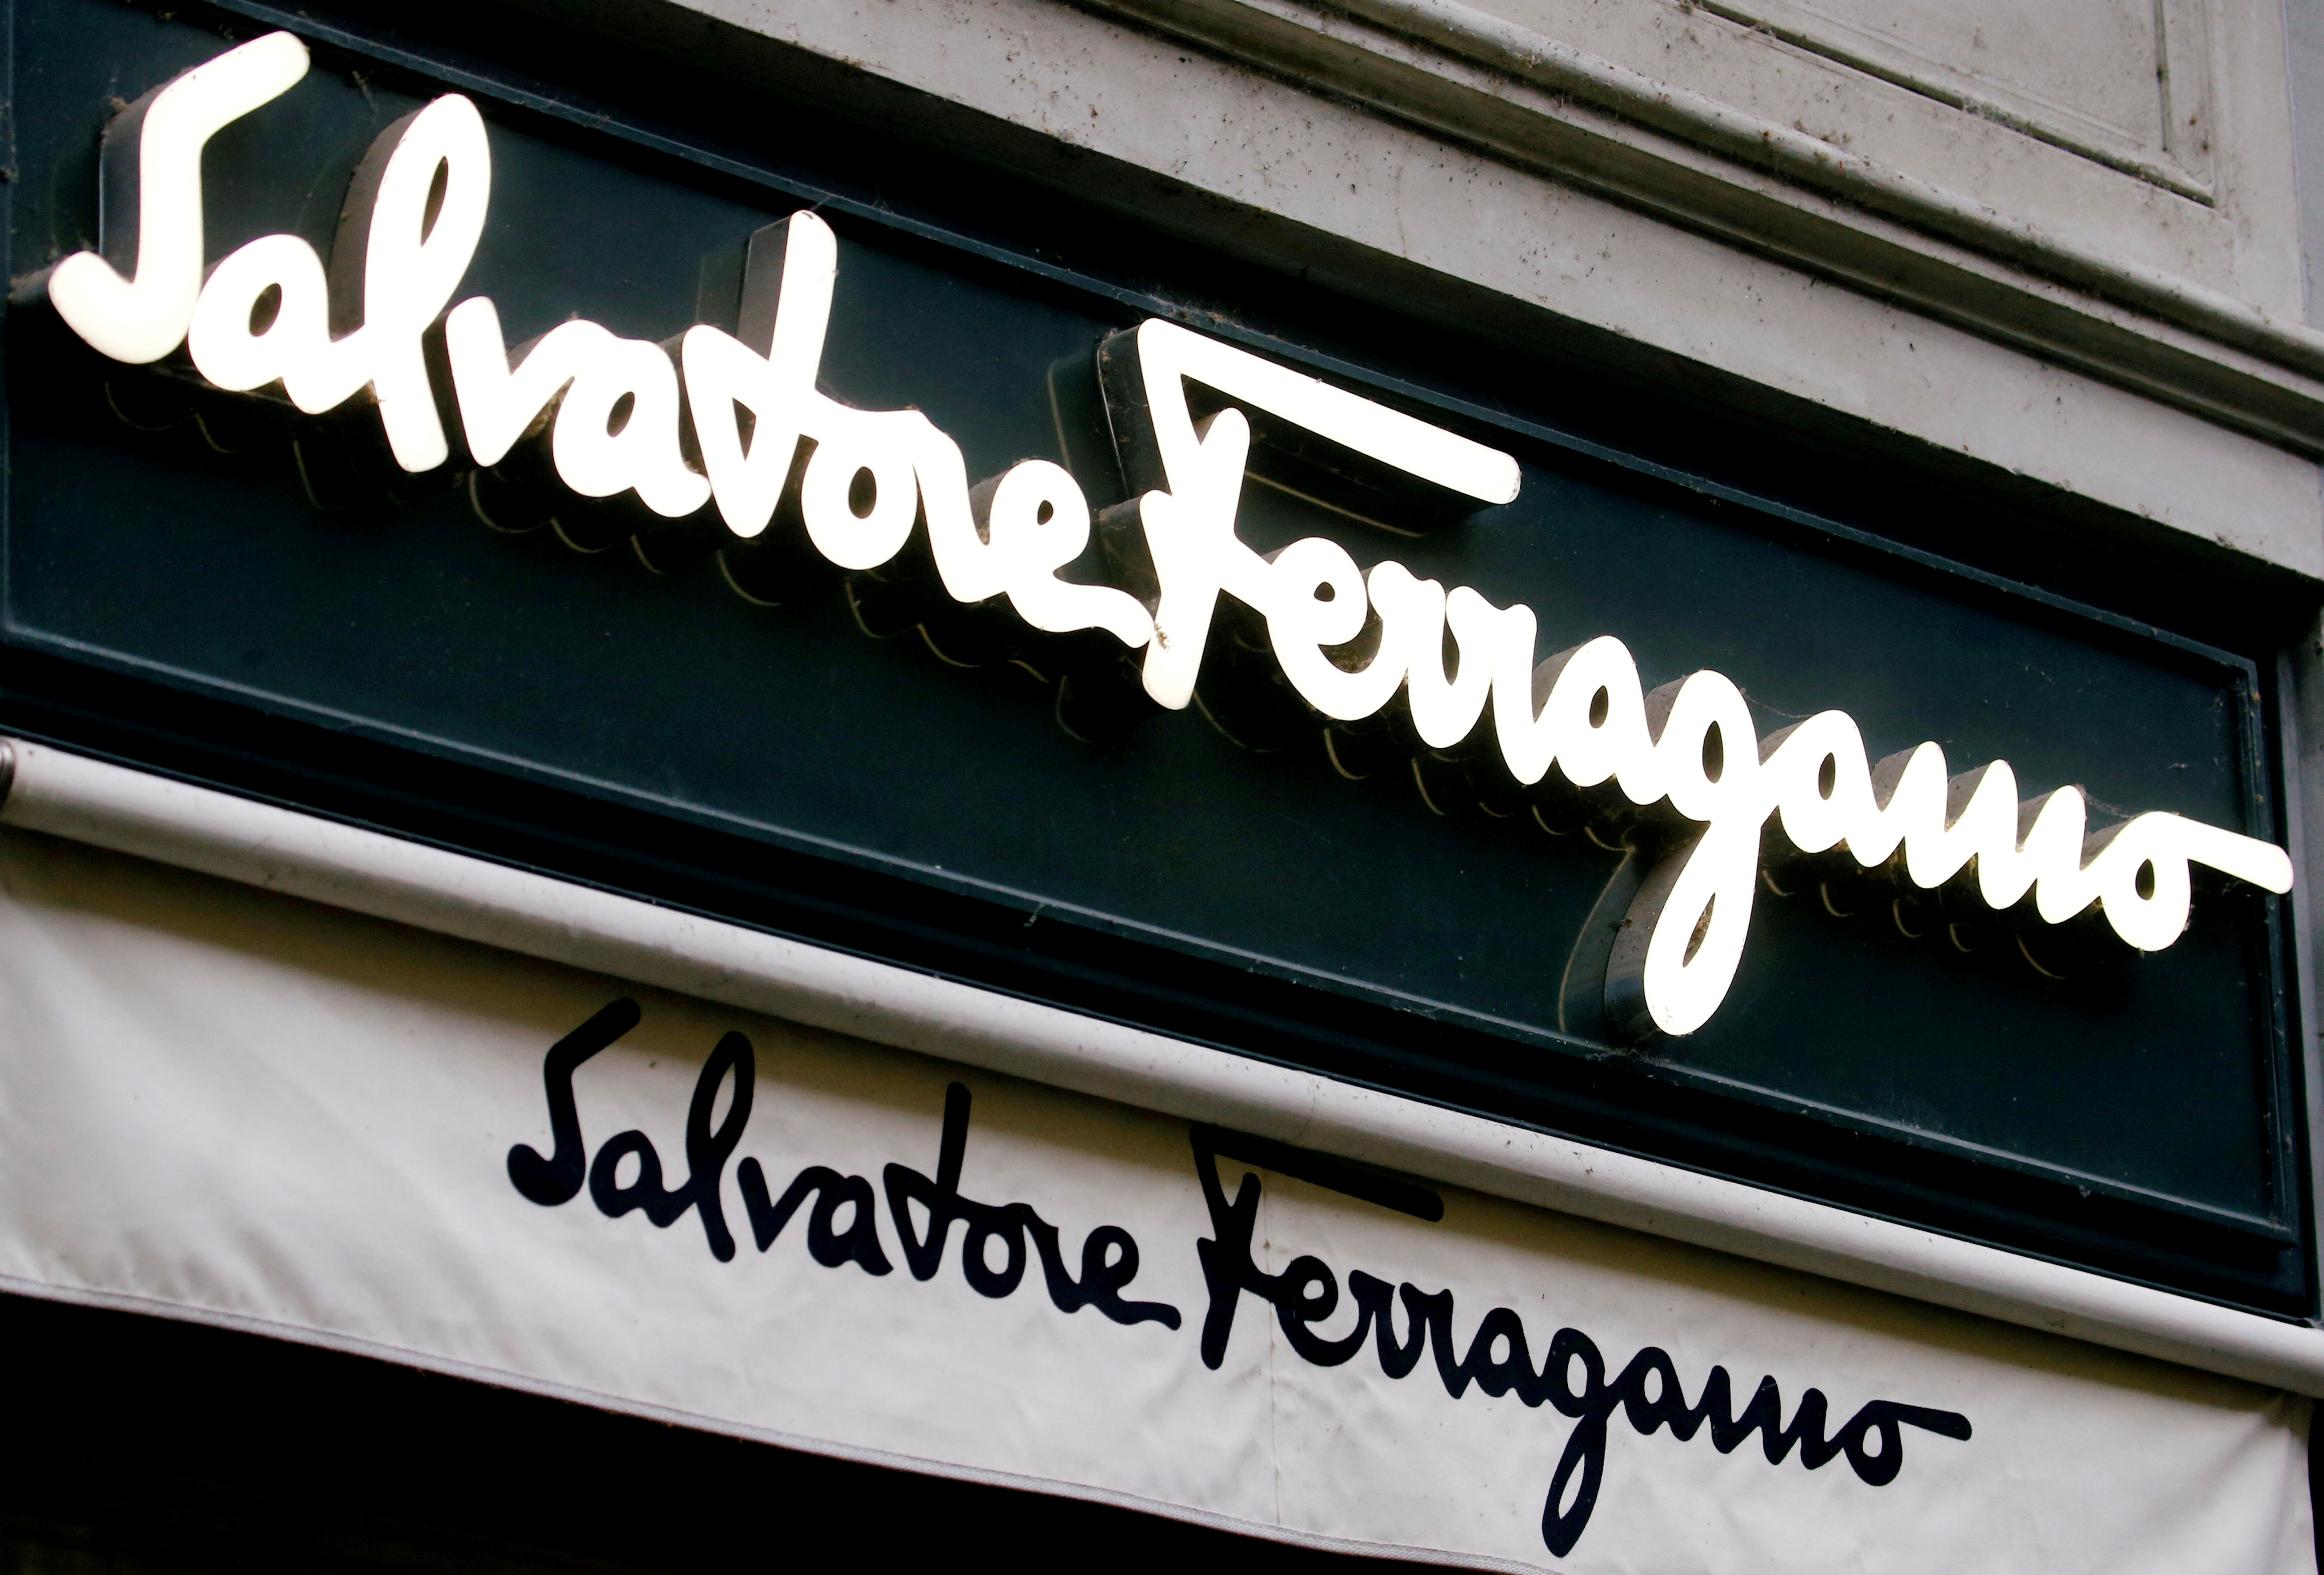 Italian luxury fashion house Salvatore Ferragamo's logo is seen at a store, as the spread of the coronavirus disease (COVID-19) continues, in Zurich, Switzerland January 25, 2021. REUTERS/Arnd Wiegmann/File Photo